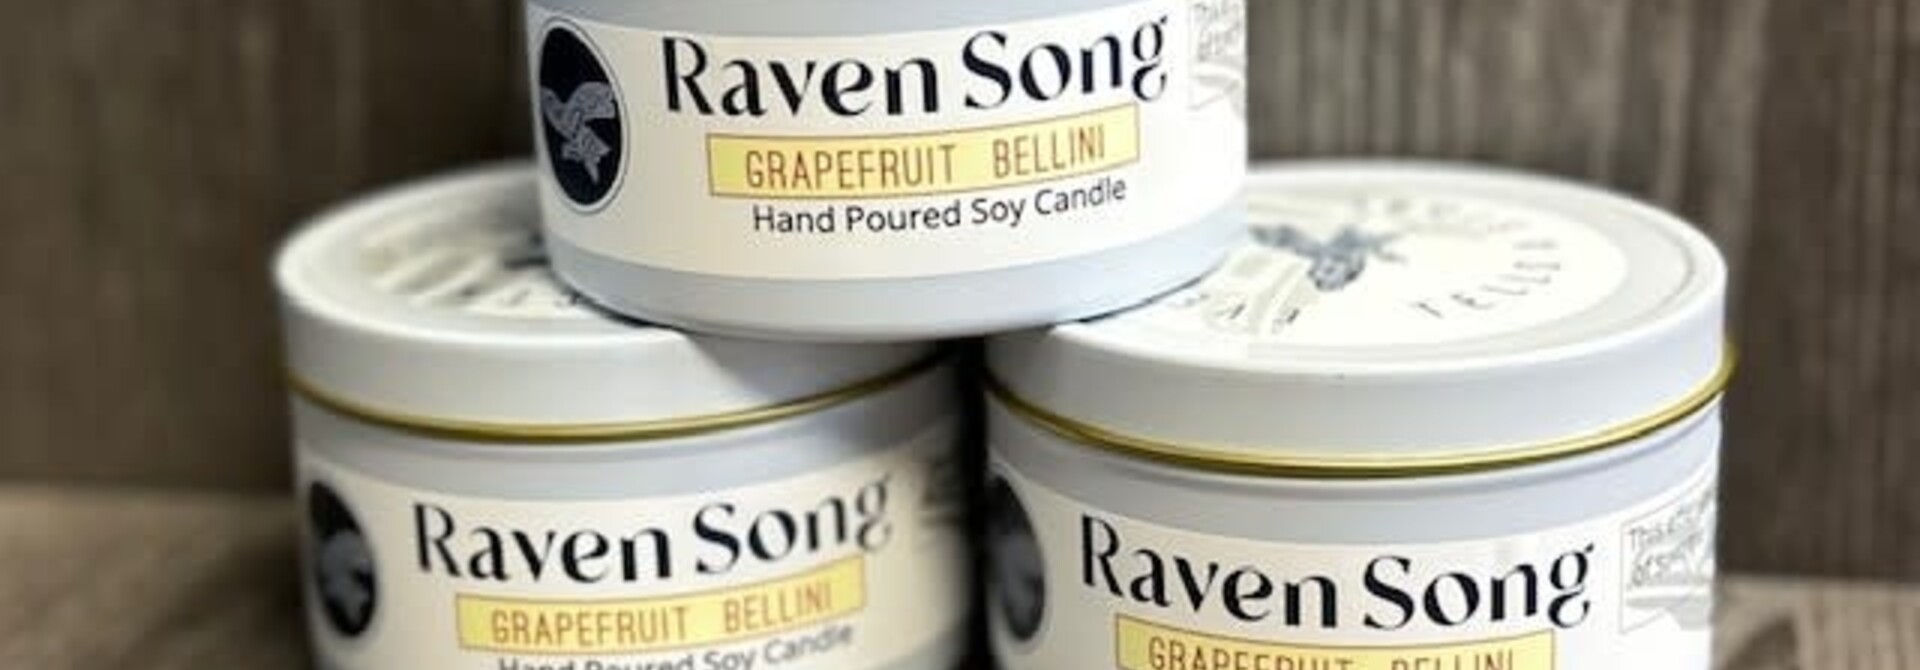 Raven Song Hand Poured  Soy Candle  Grapefruit Bellini